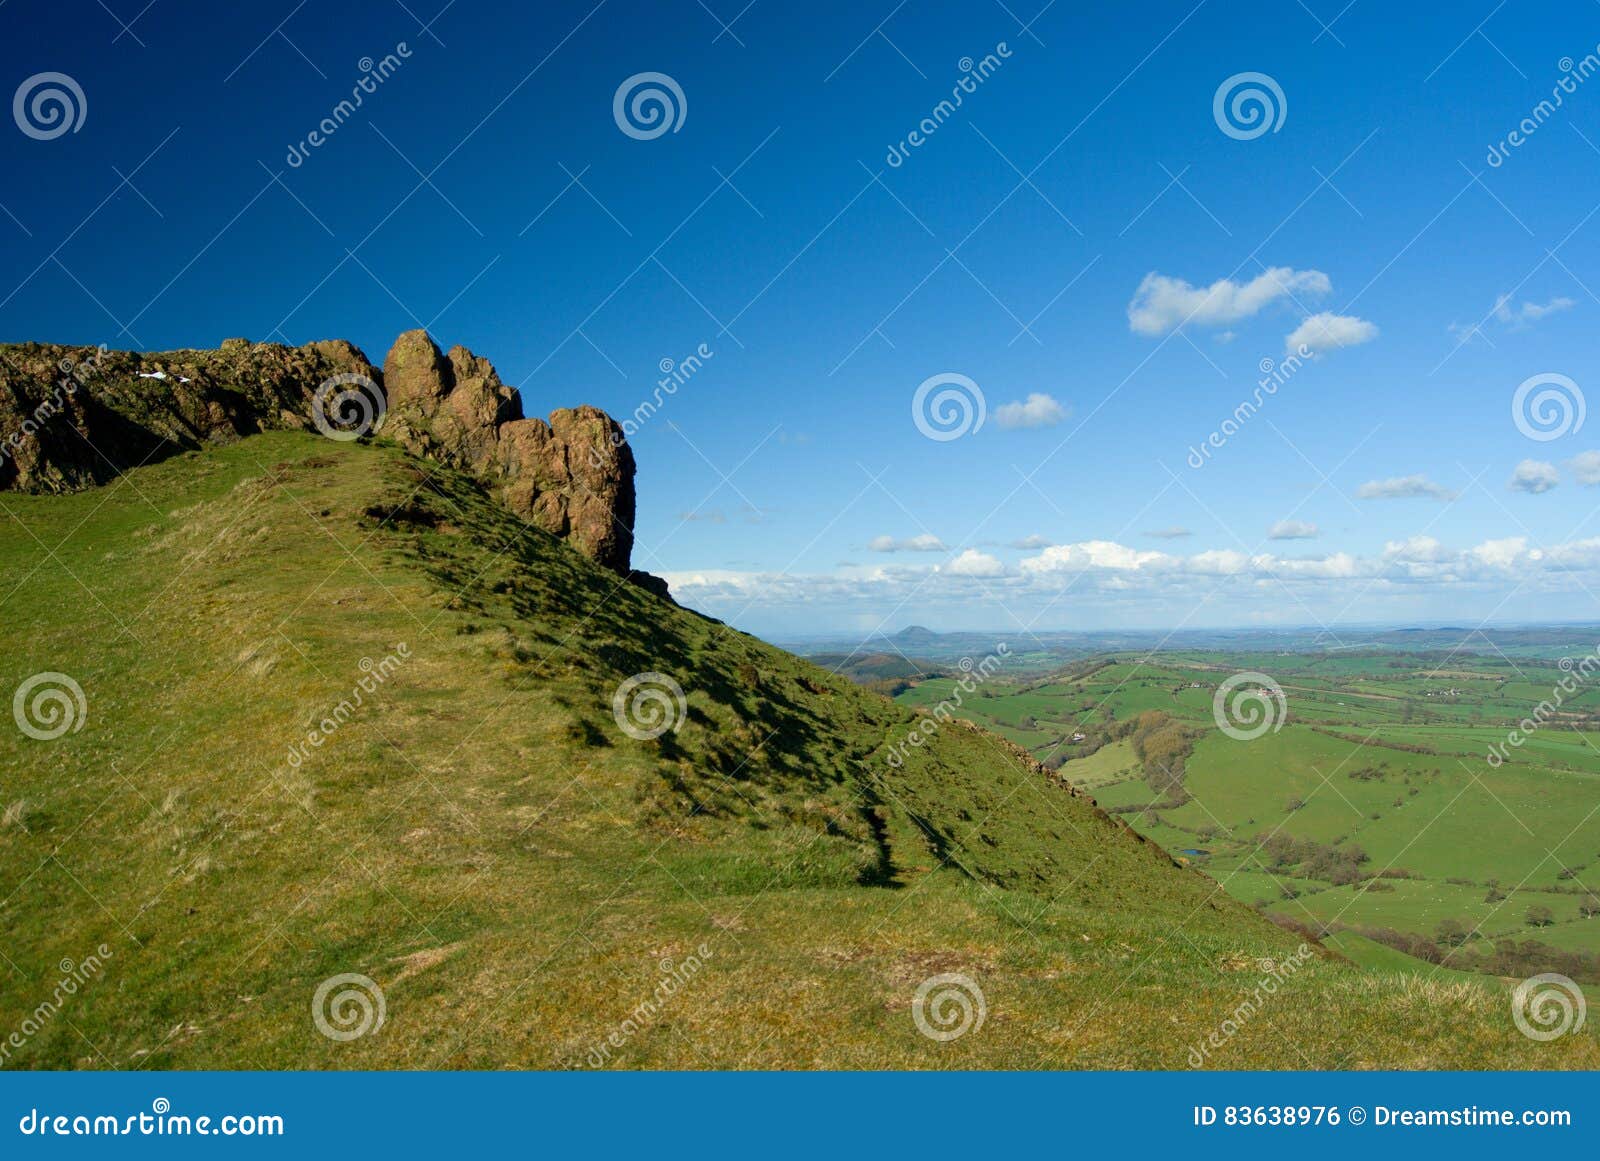 rock of the caer caradoc, volcanic british and welsh hill